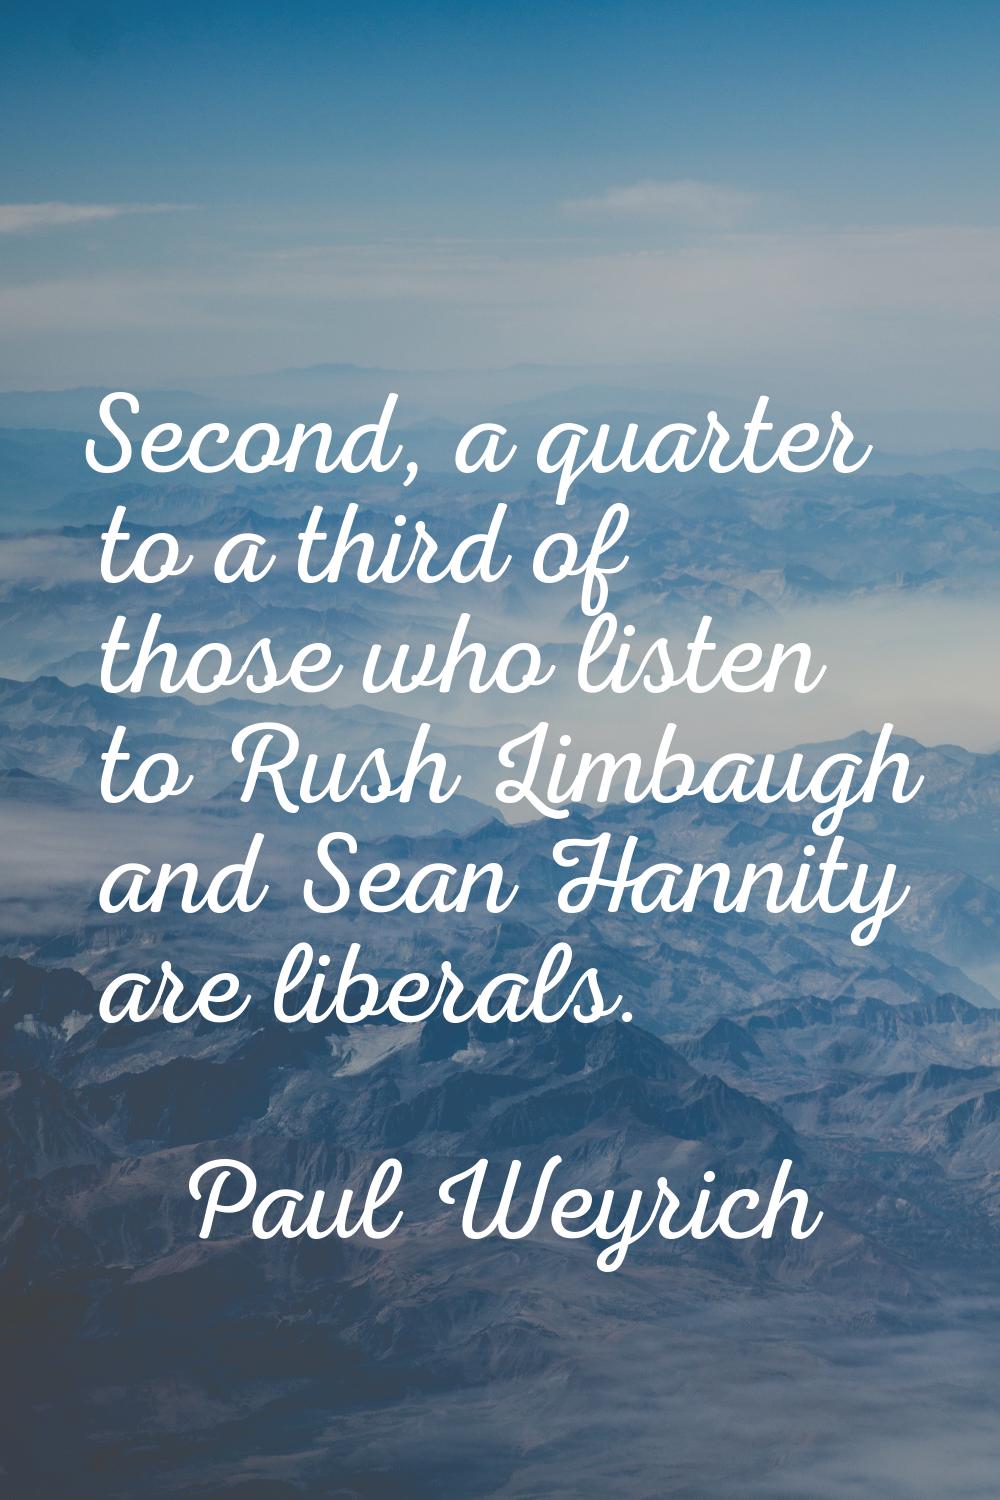 Second, a quarter to a third of those who listen to Rush Limbaugh and Sean Hannity are liberals.